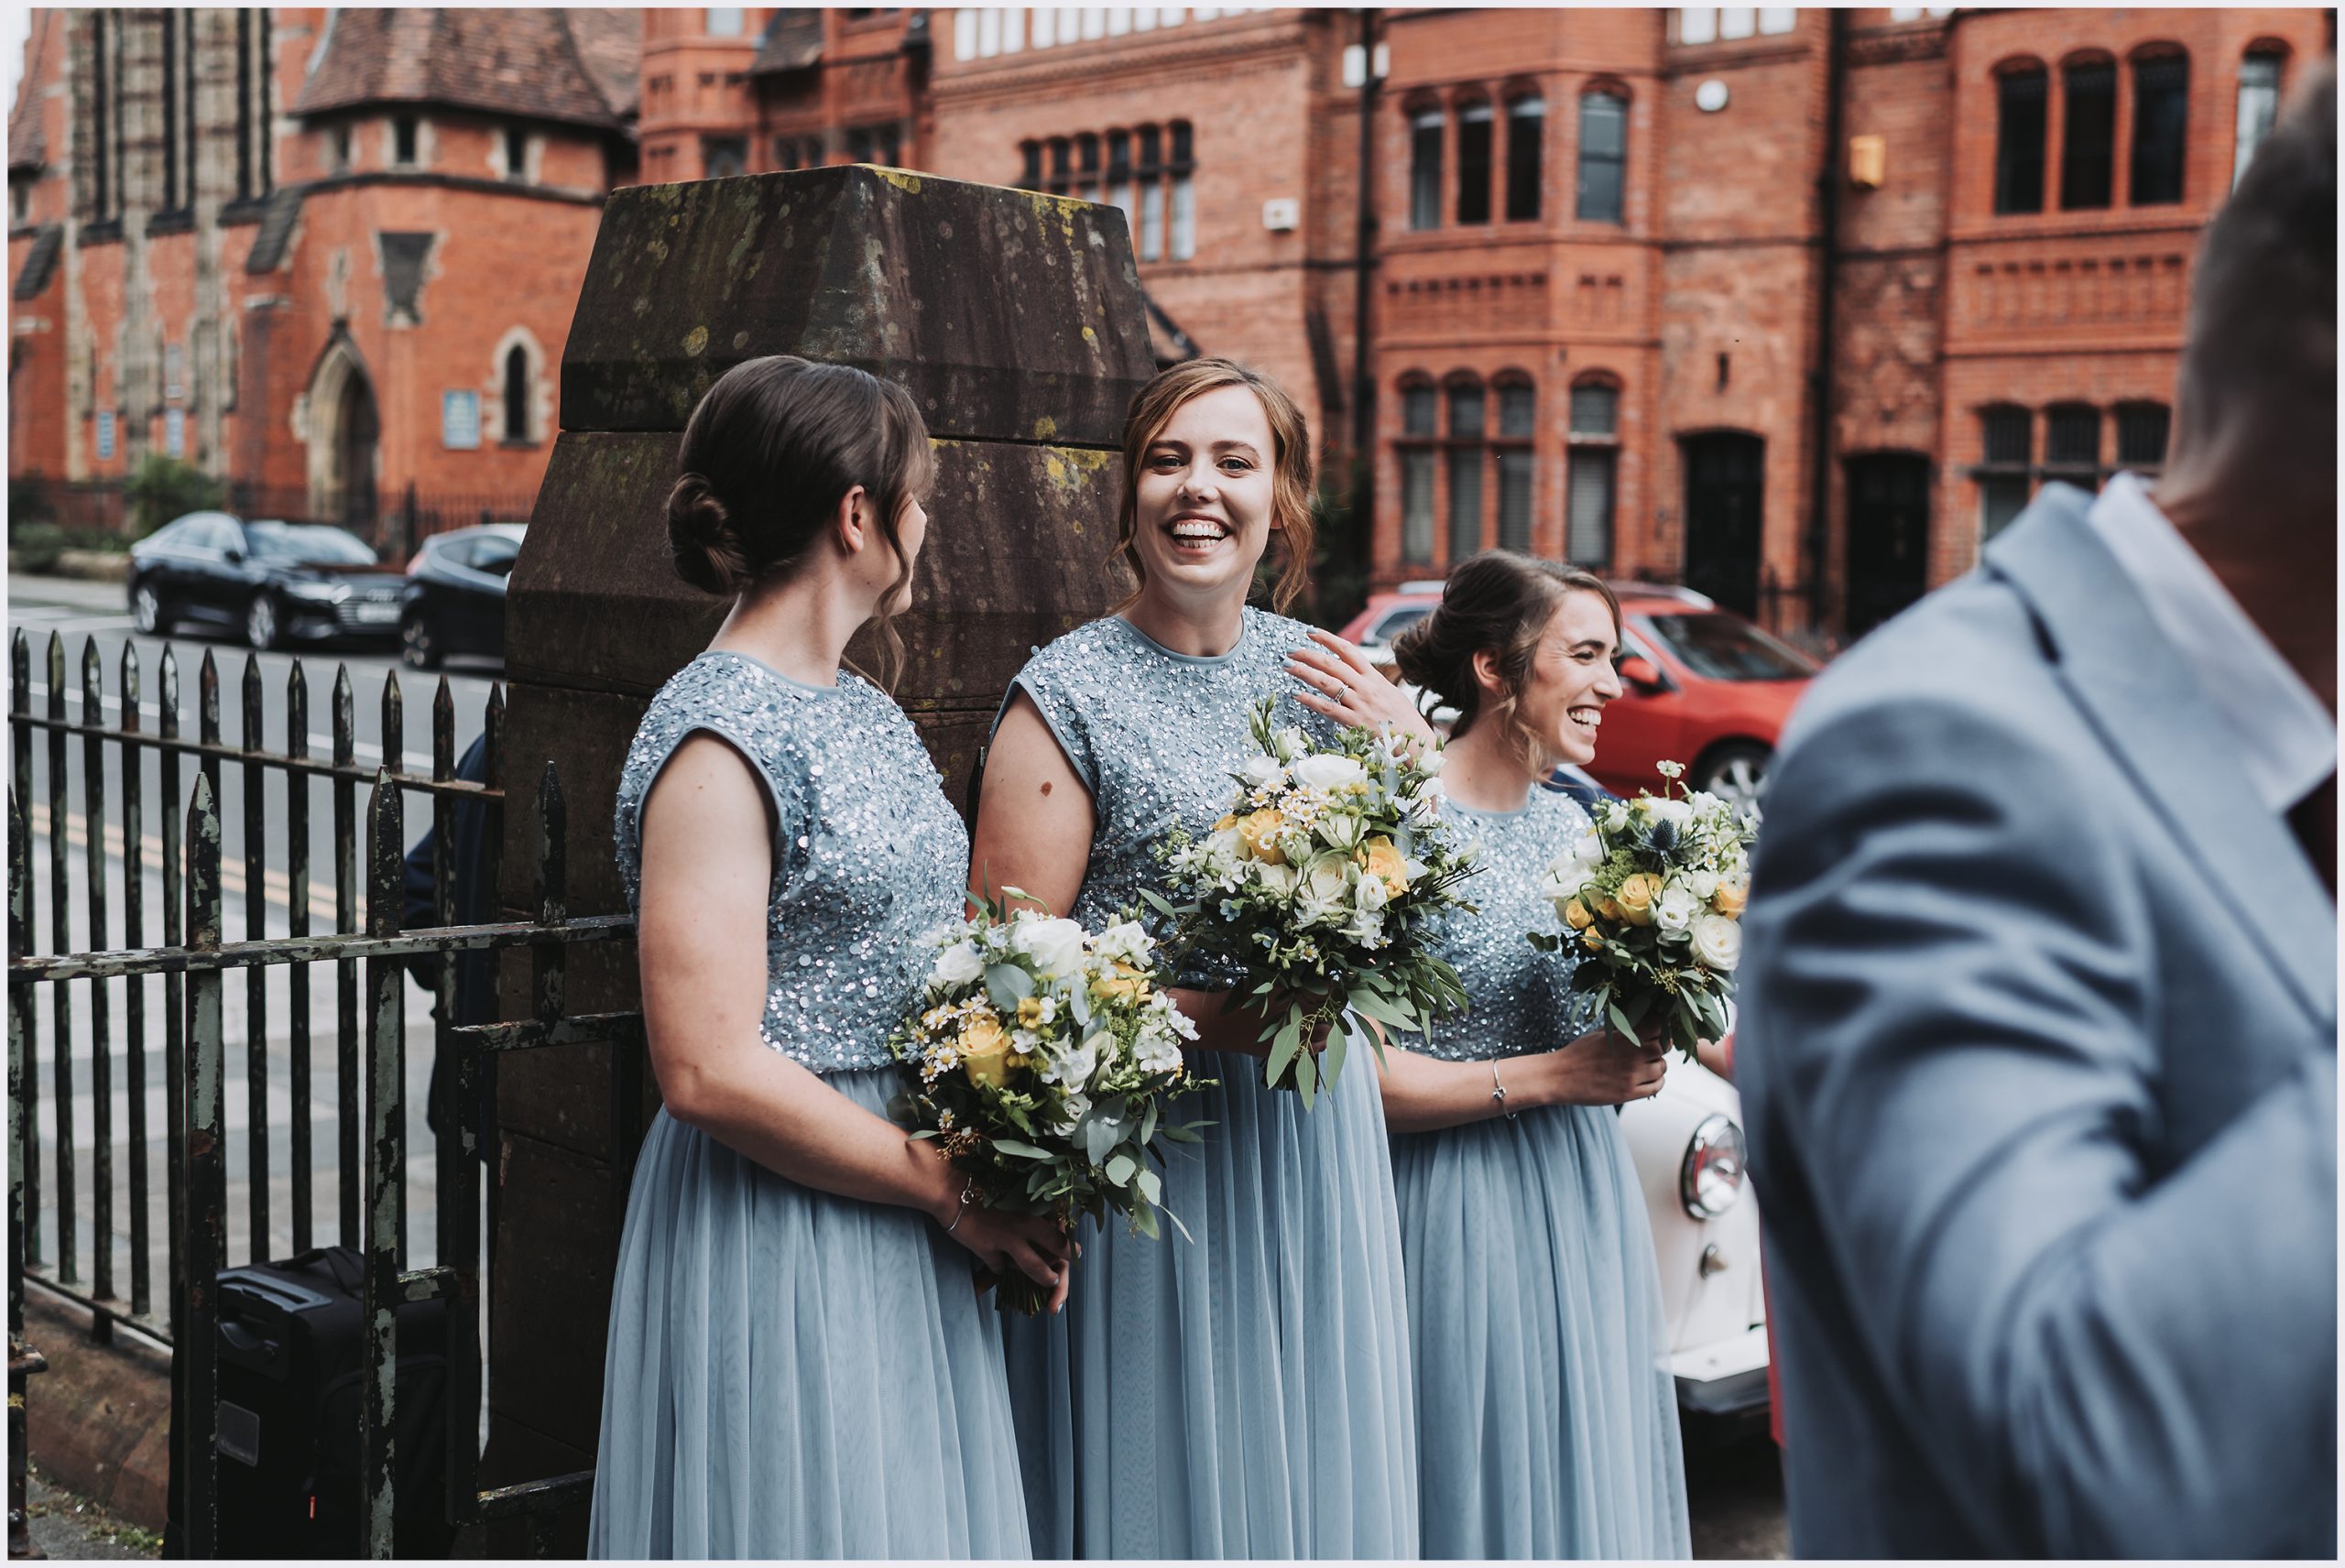 Three smiling bridesmaids stand together in their gorgeous pale blue dresses after the wedding ceremony of their best friends.  Image captured by Helena Jayne Photography a wedding photographer based in Chester